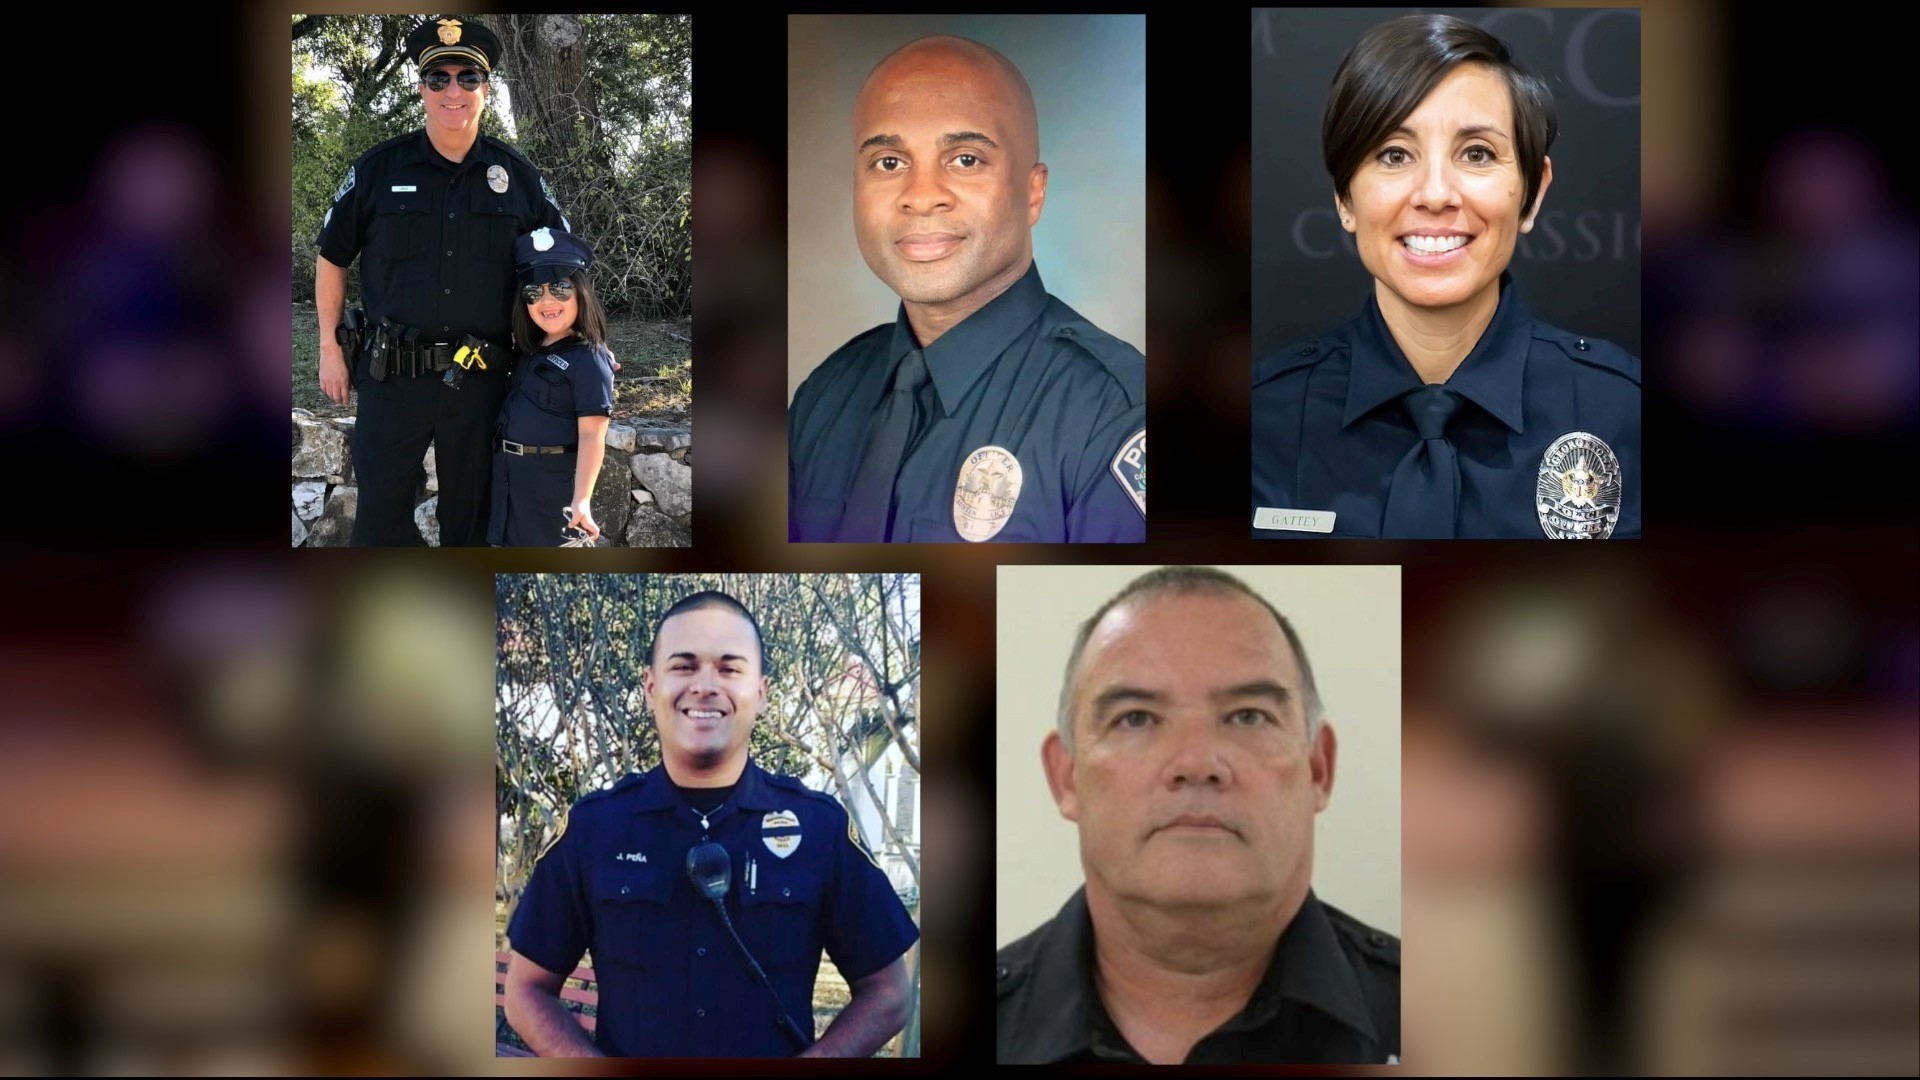 Clockwise from top: Senior Sgt. Steve Urias - Austin Police Department, Officer Randy Boyd - Austin Police Department, Officer Michelle Gattey- Georgetown Police Department, Officer Jay Pena - San Antonio Park Police, and Deputy Ronald Buttler -Bexar County Sheriff’s Office. (Spectrum News 1)